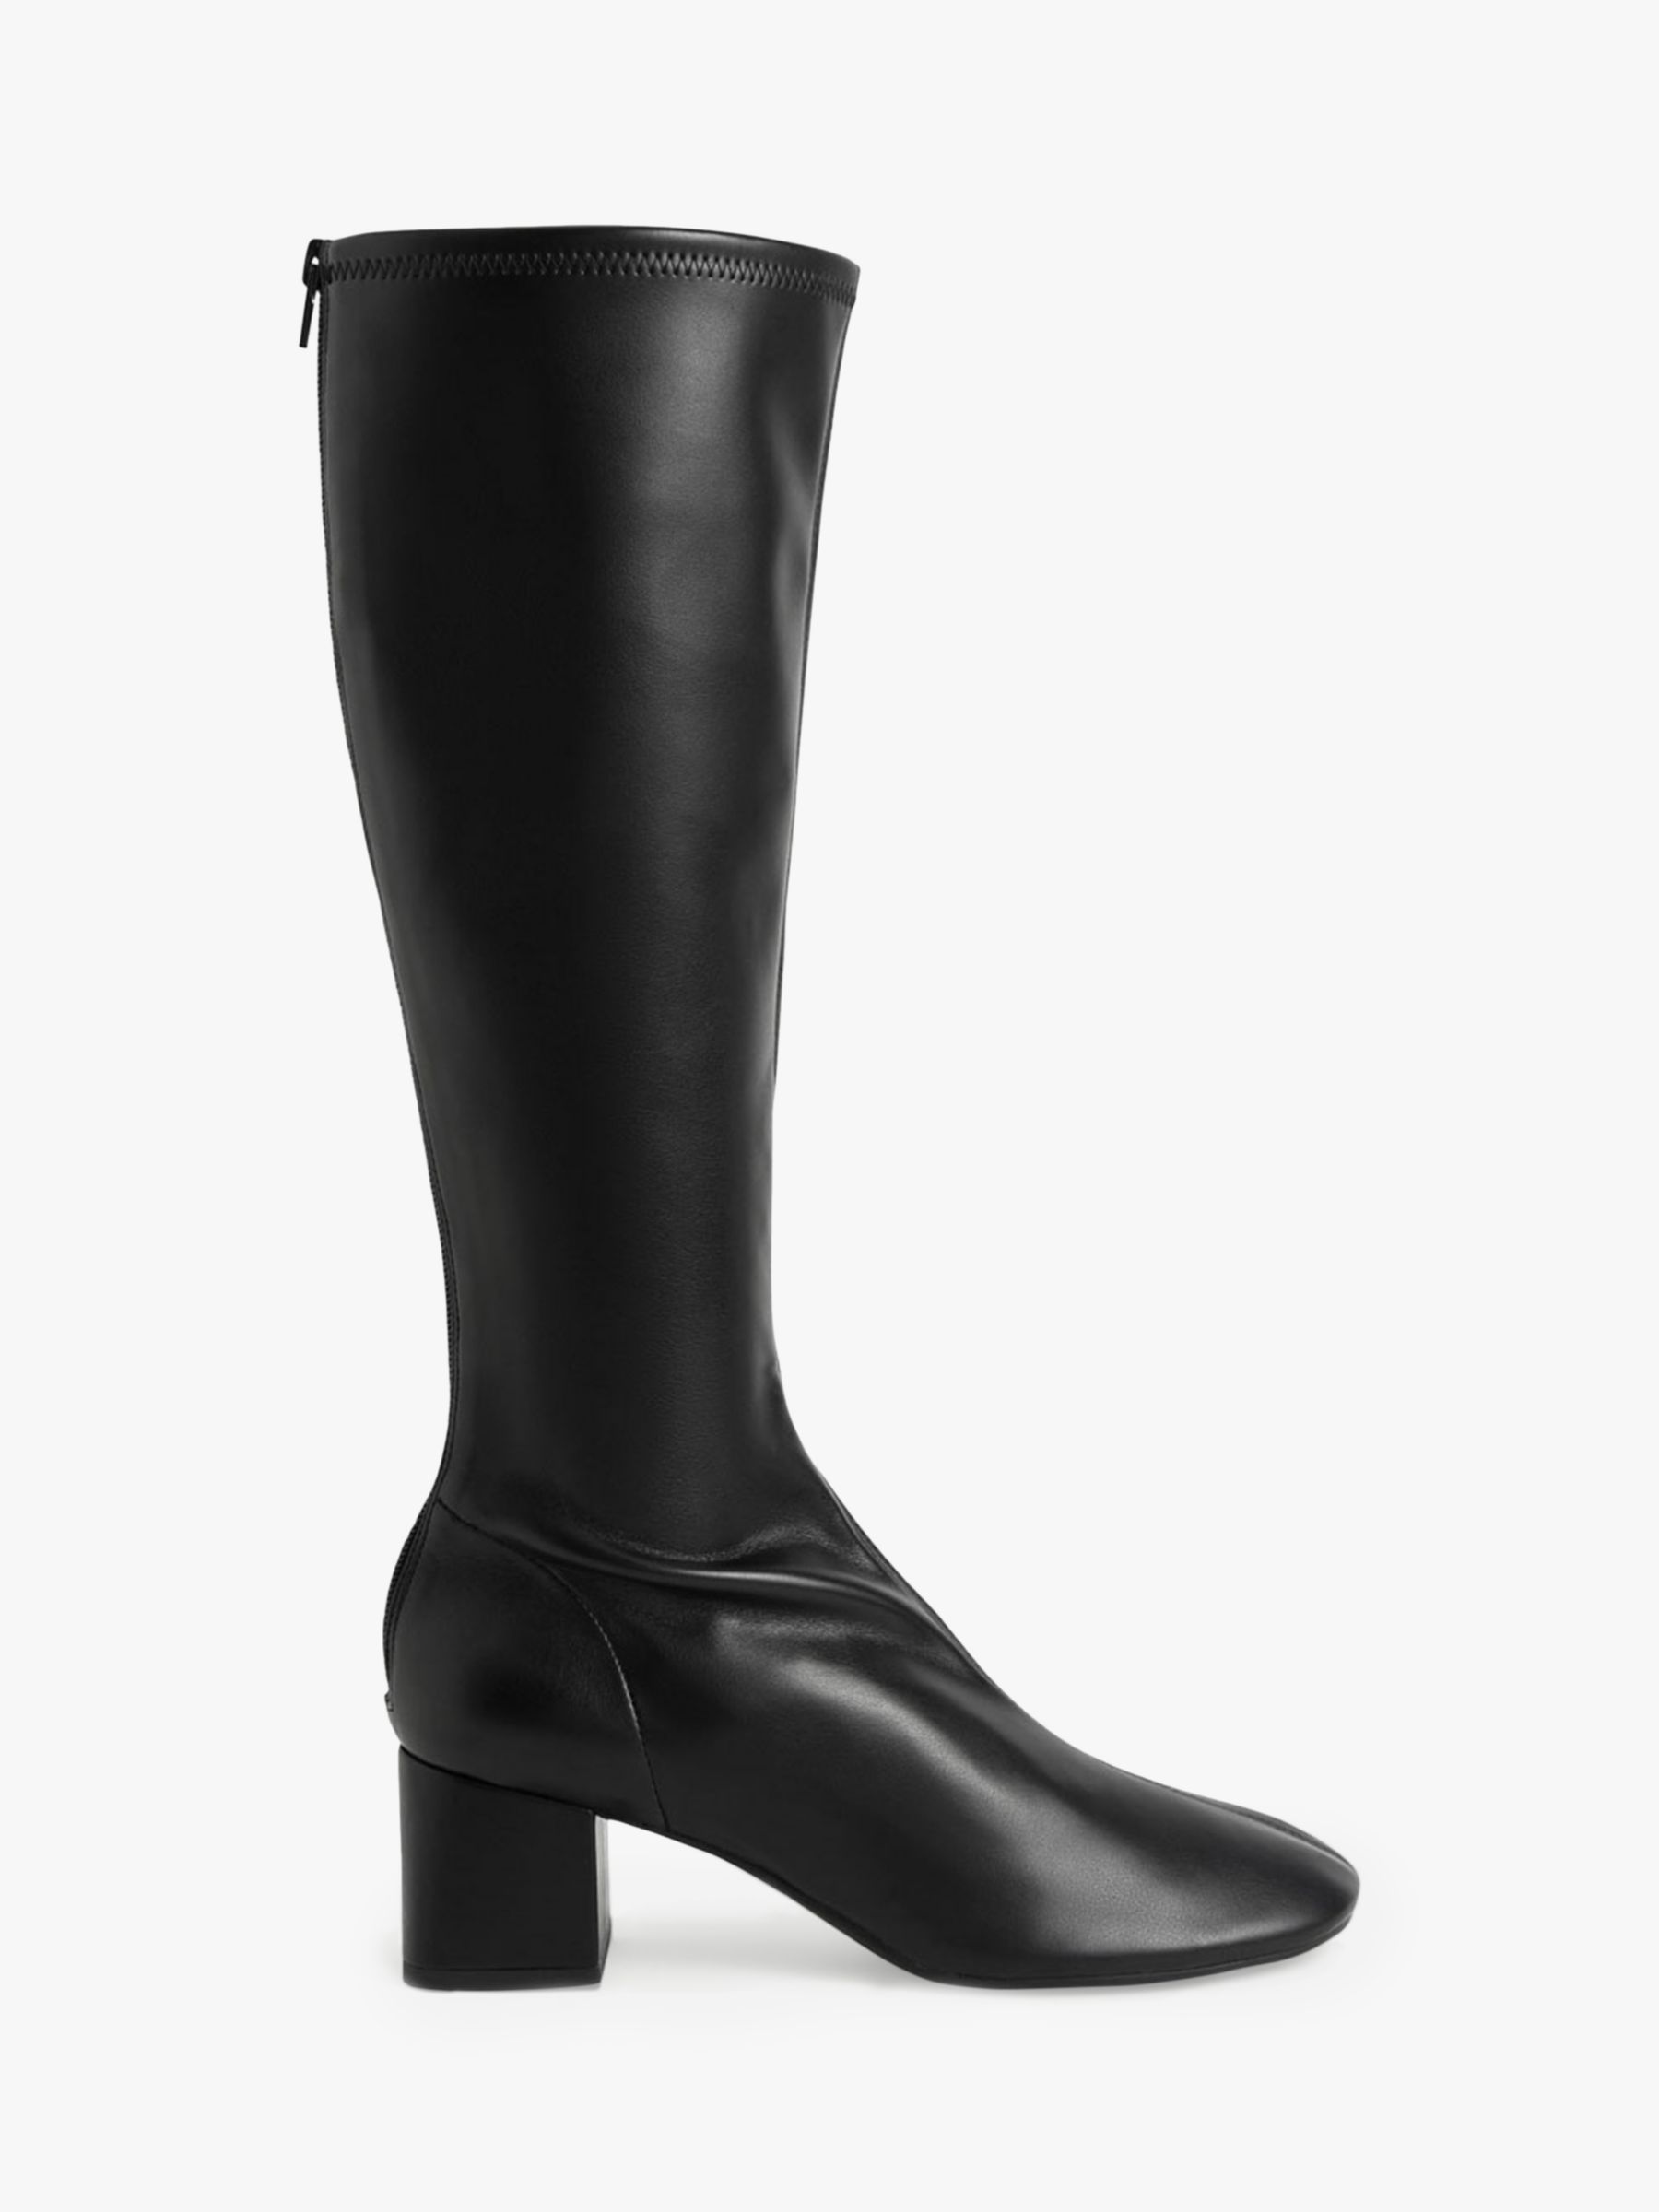 CHARLES & KEITH Stretch Knee High Boots